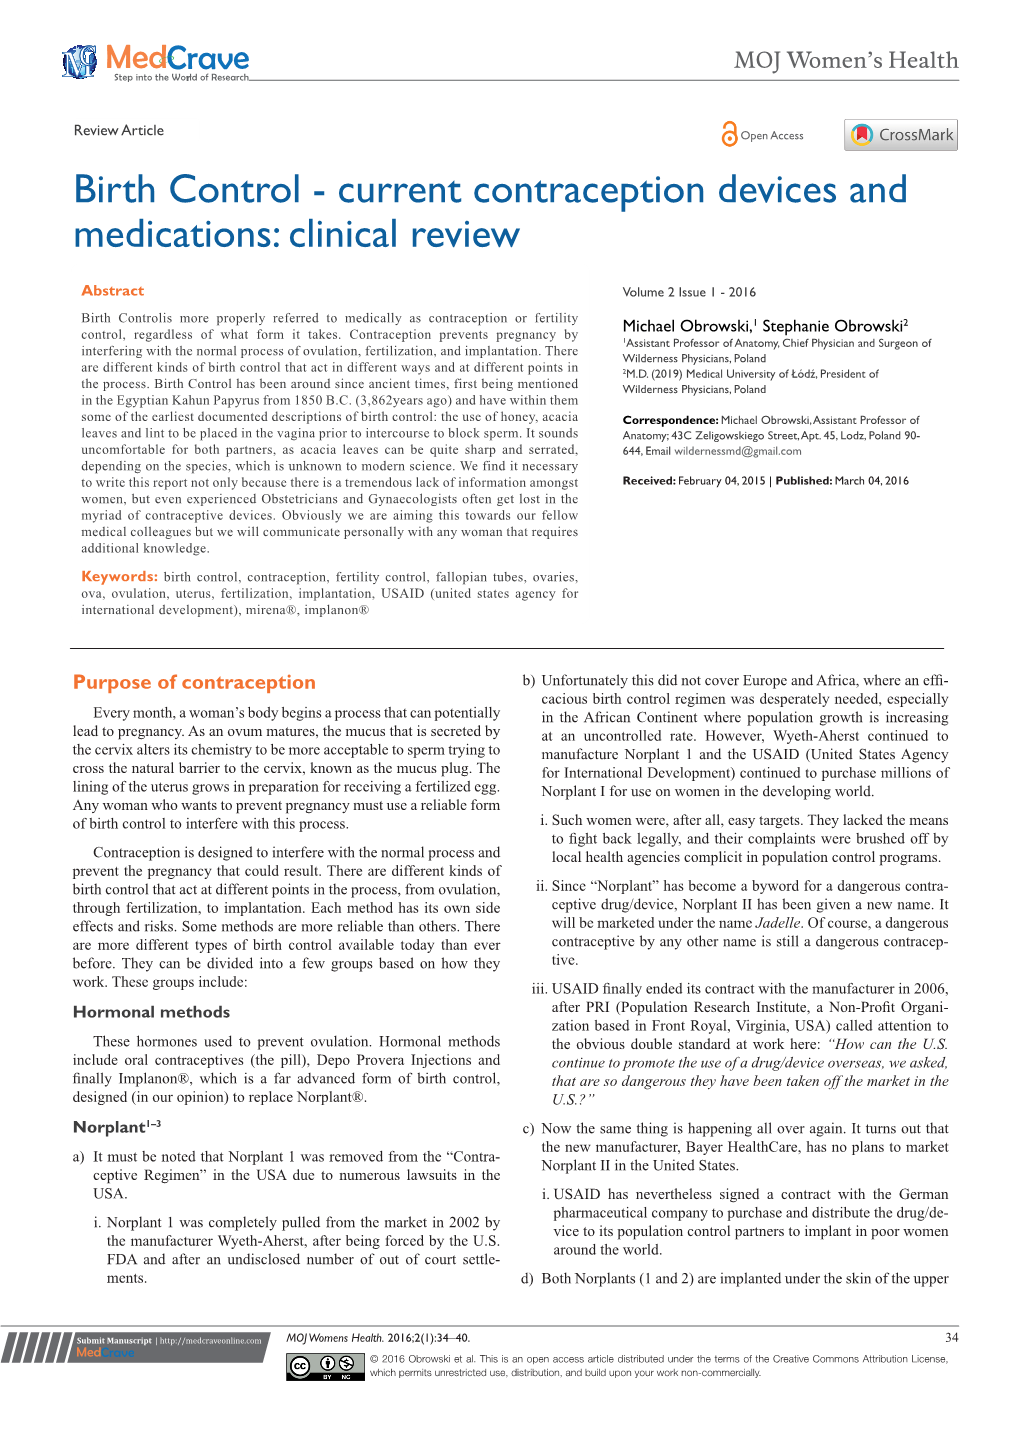 Birth Control - Current Contraception Devices and Medications: Clinical Review